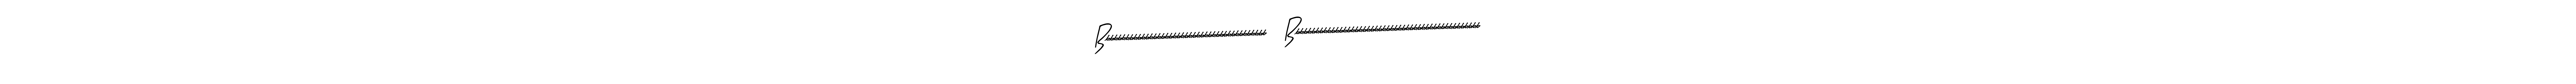 Also You can easily find your signature by using the search form. We will create Bbbbbbbbbbbbbbbbbbbbbbbbbbbbbbbbbbbbbbbbbb! Bbbbbbbbbbbbbbbbbbbbbbbbbbbbbbbbbbbbbbbbbbbbbbbb name handwritten signature images for you free of cost using Arty Signature sign style. Bbbbbbbbbbbbbbbbbbbbbbbbbbbbbbbbbbbbbbbbbb! Bbbbbbbbbbbbbbbbbbbbbbbbbbbbbbbbbbbbbbbbbbbbbbbb signature style 8 images and pictures png